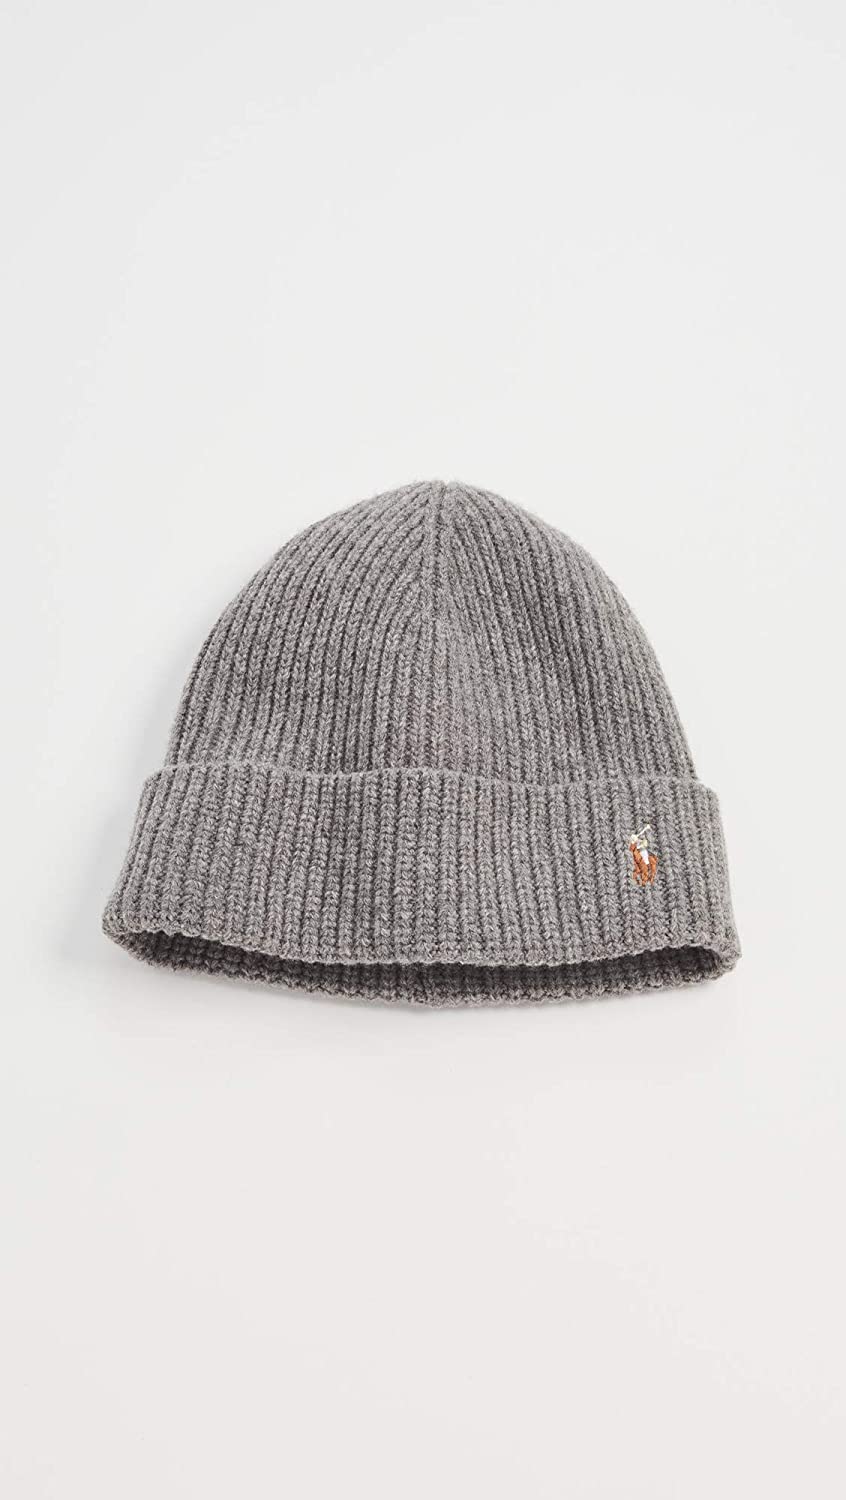 Polo Ralph Lauren Signature Cuff Knit Hat OS - image 3 of 3